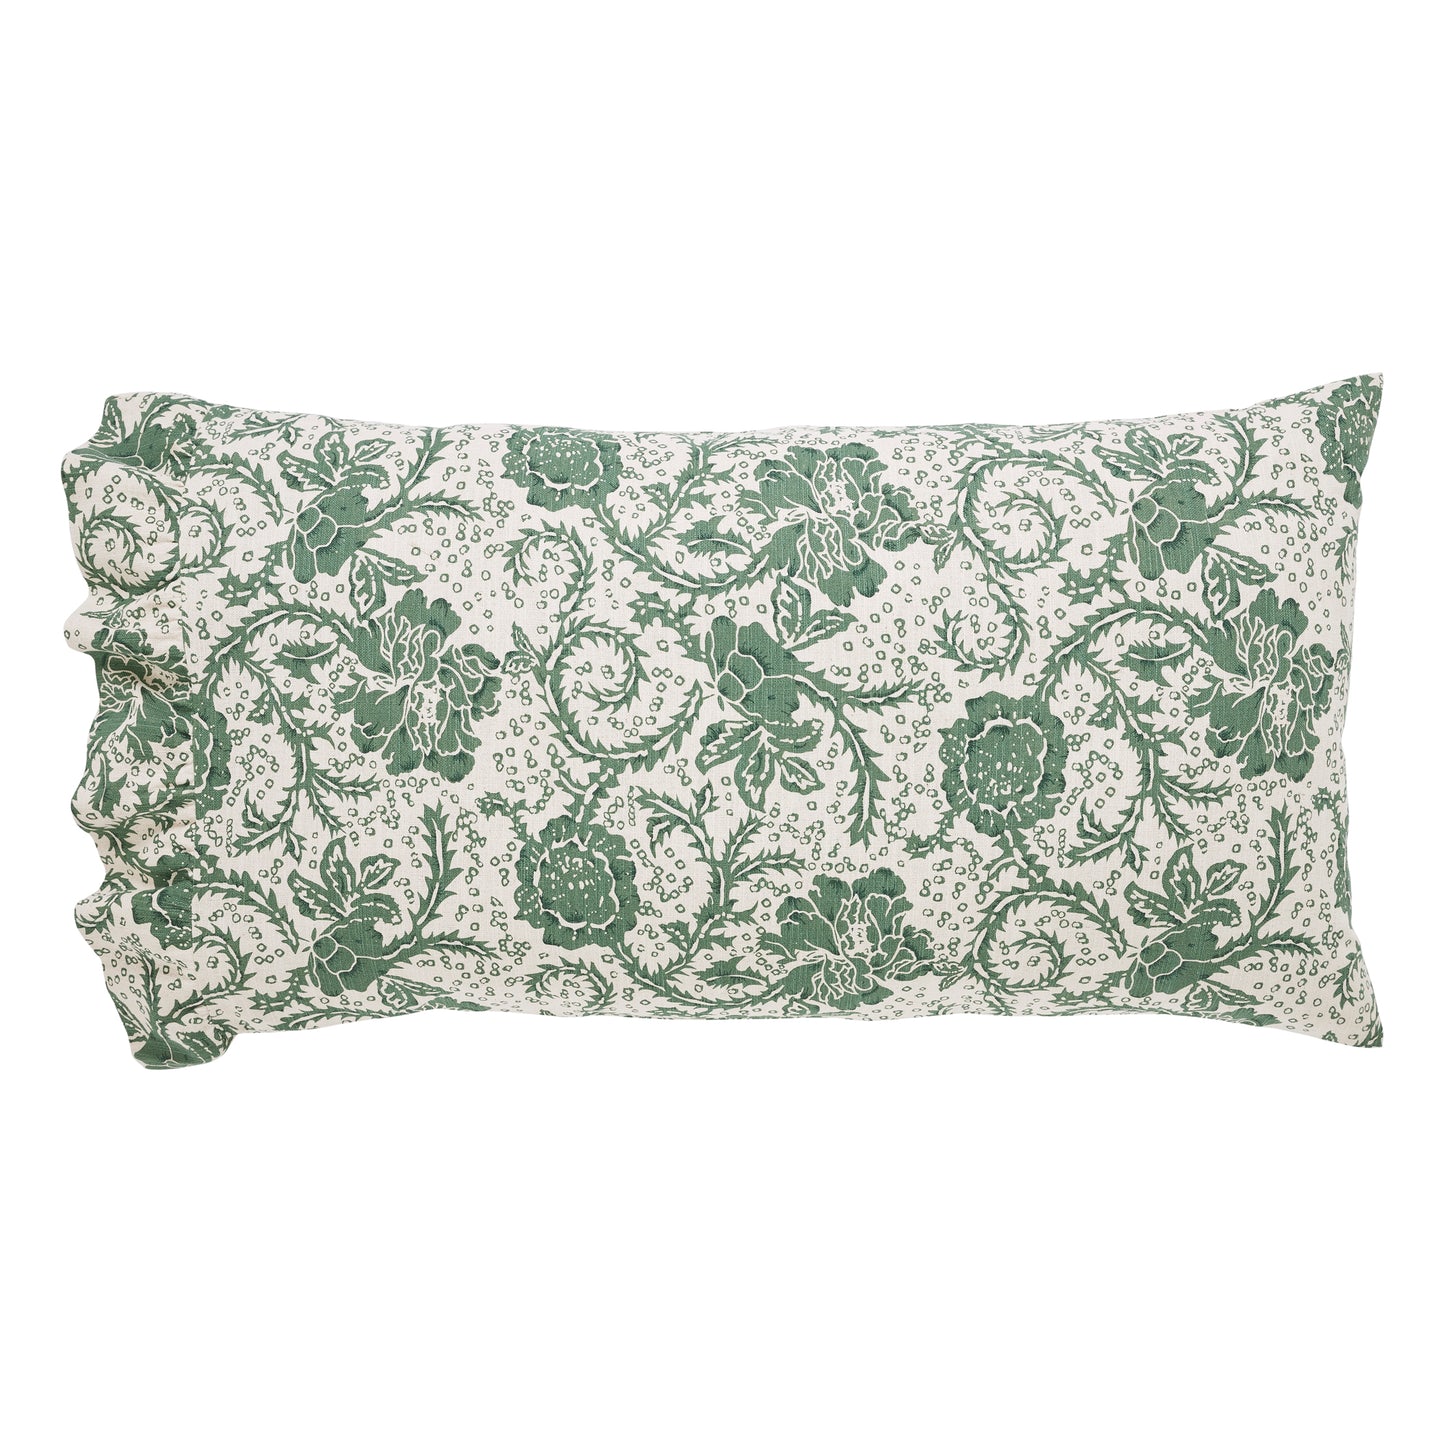 81220-Dorset-Green-Floral-Ruffled-King-Pillow-Case-Set-of-2-21x36-4-image-5